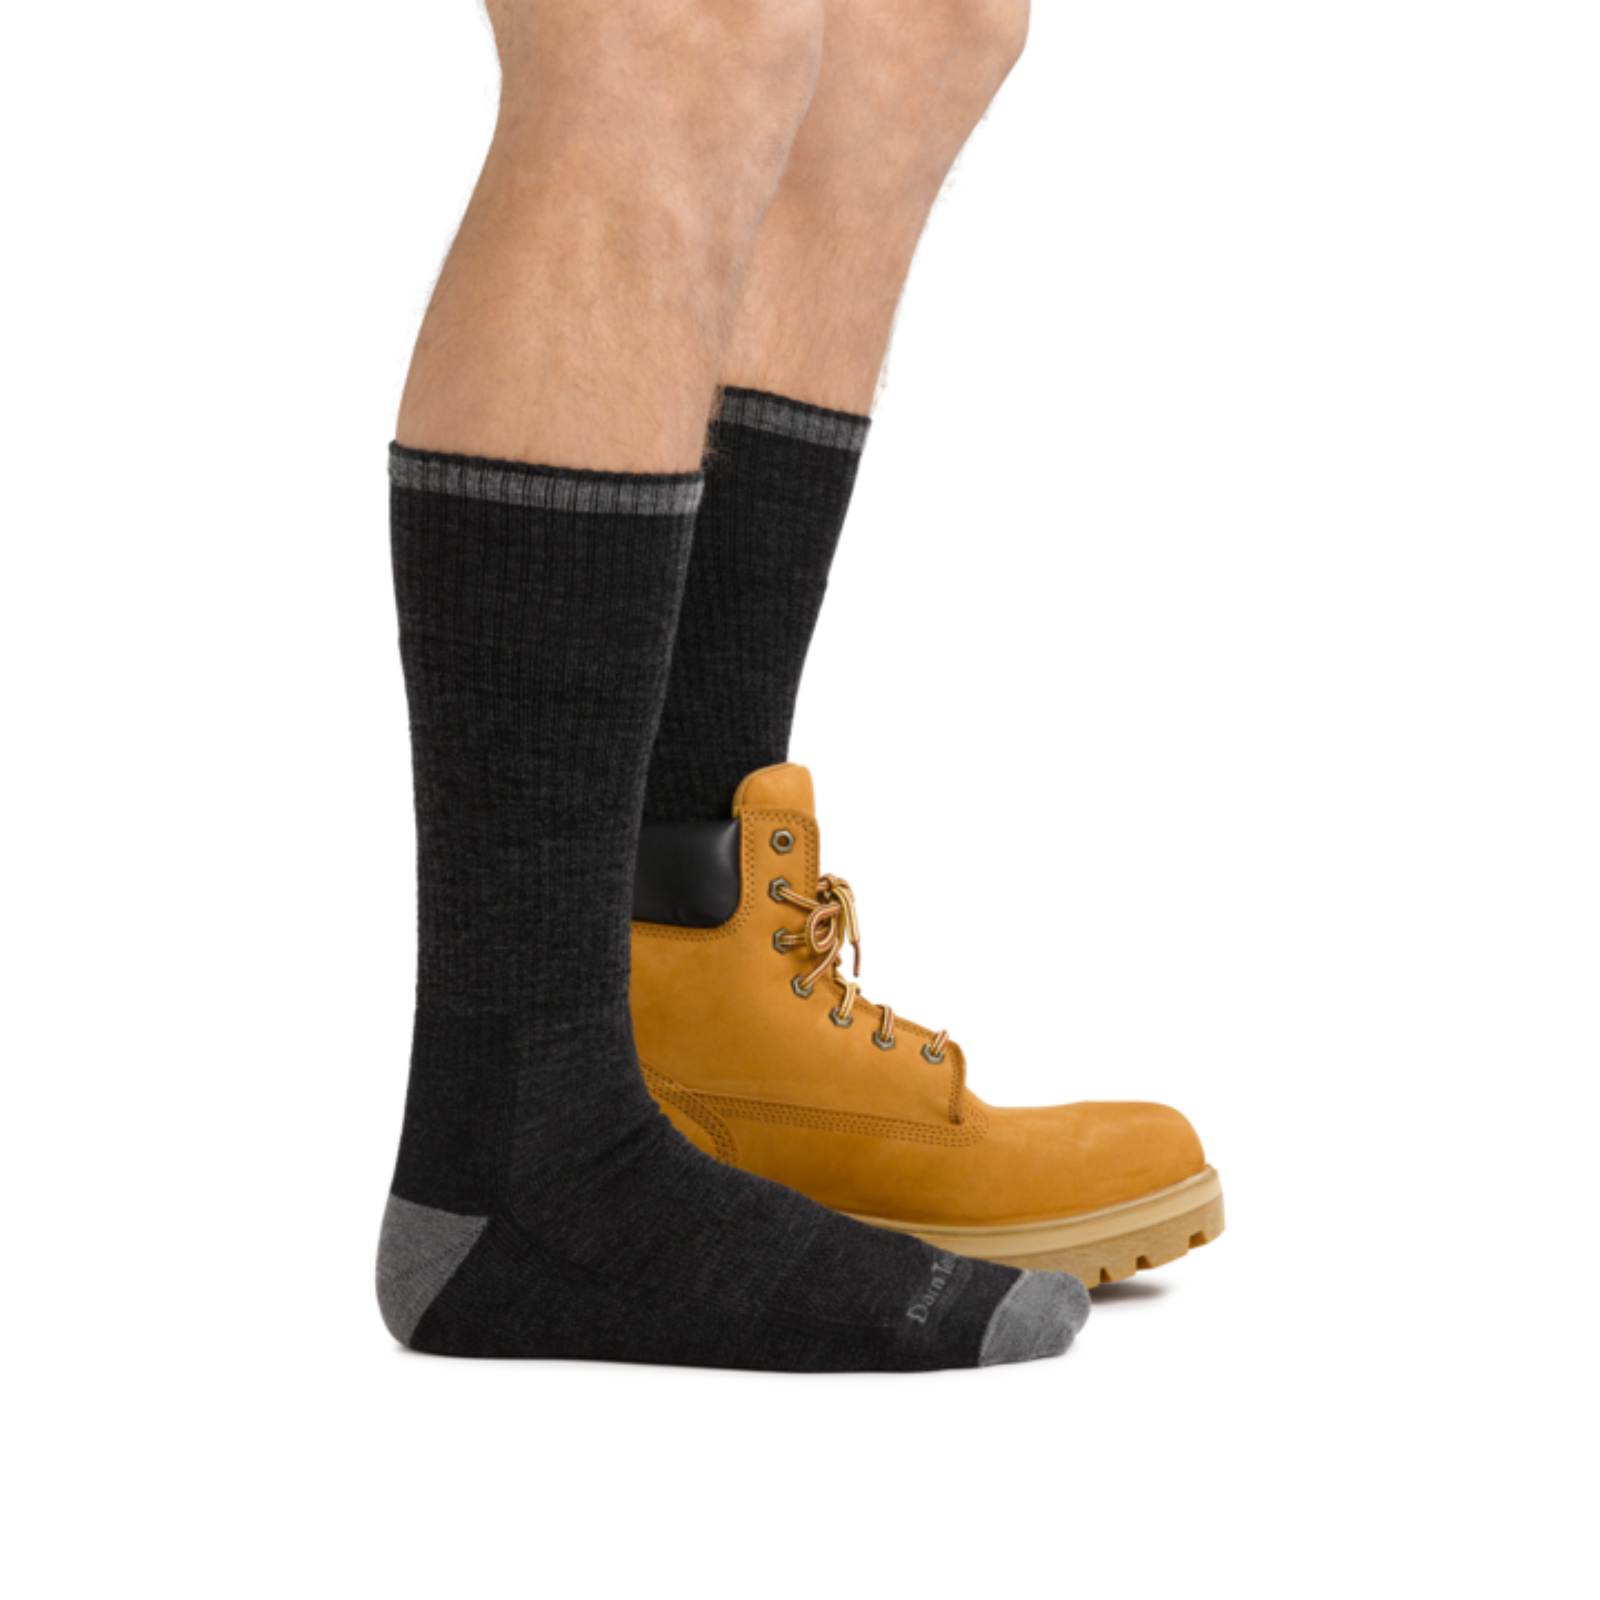 Men's Boot Socks  Shop Georgia Socks for Boots & Our Work Boot